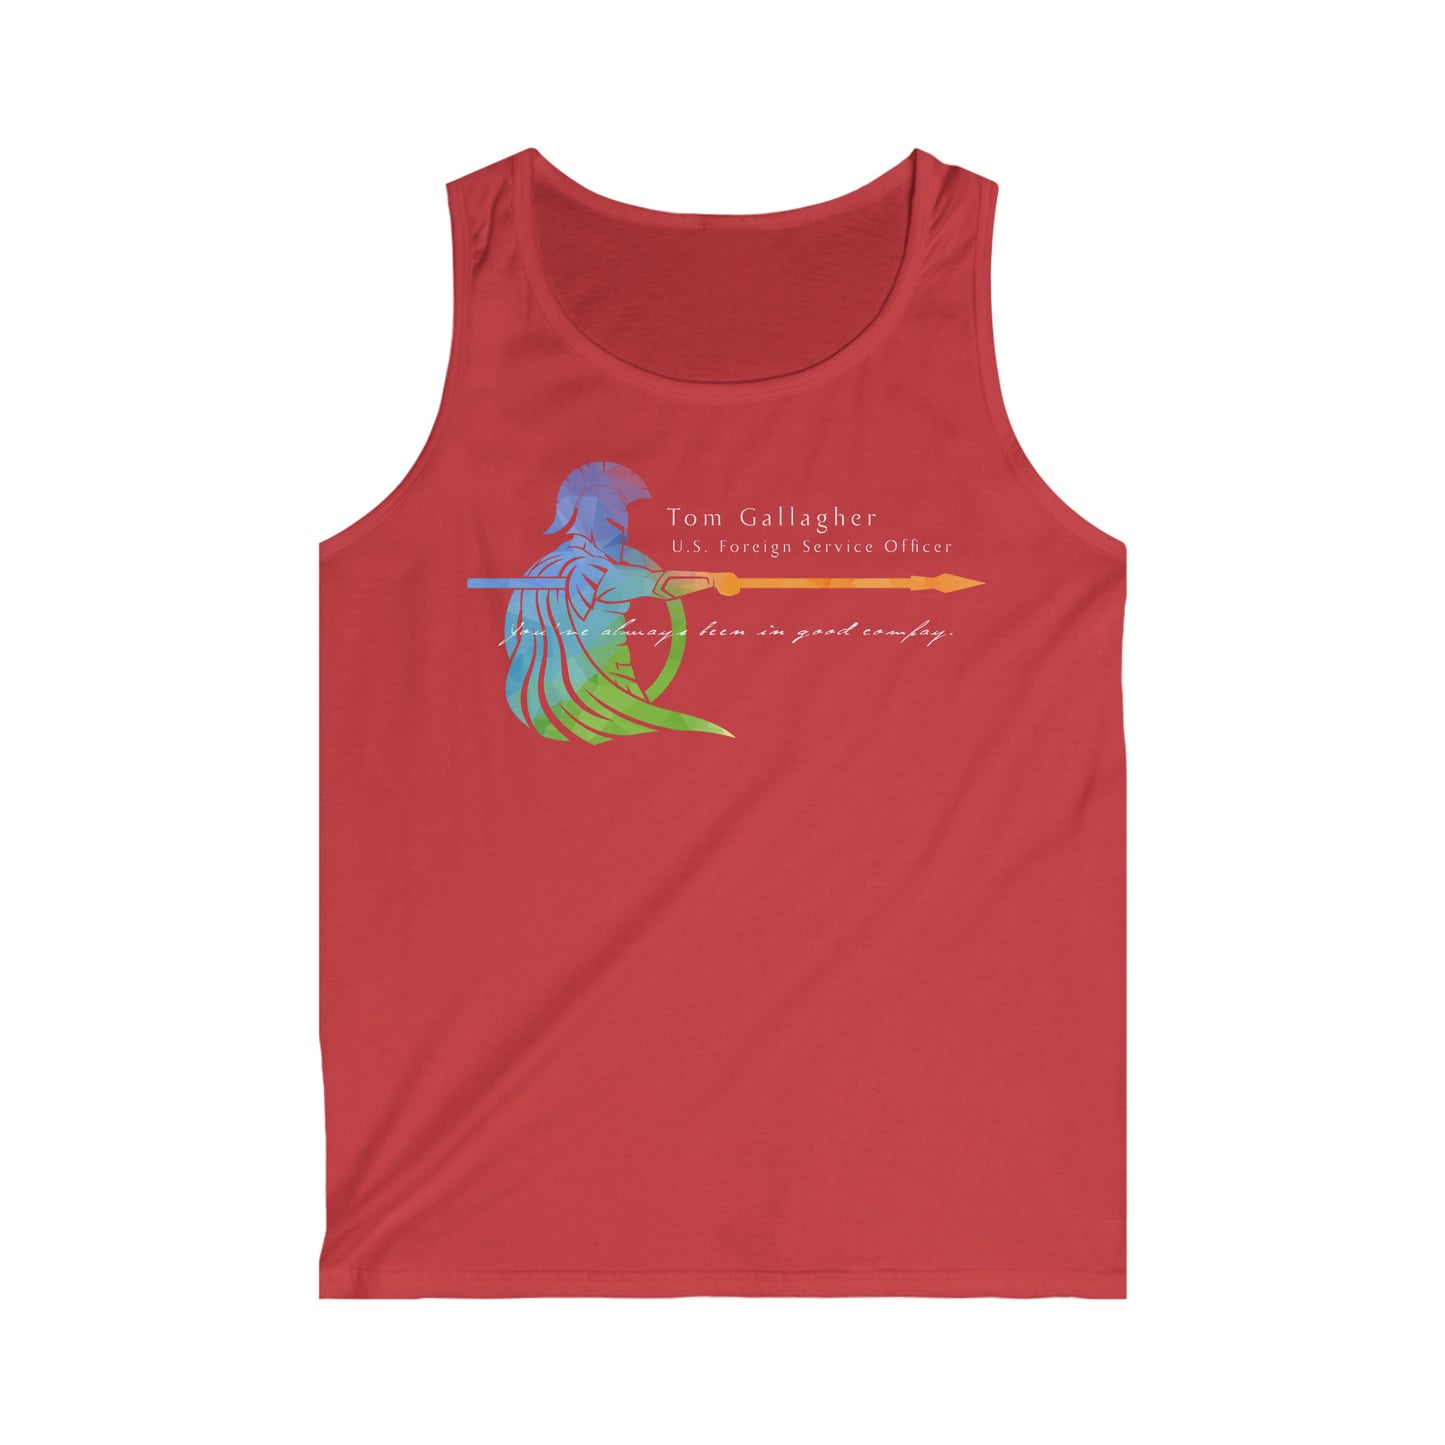 Tom Gallagher | U.S. Foreign Service Officer | Pride Jersey Tank